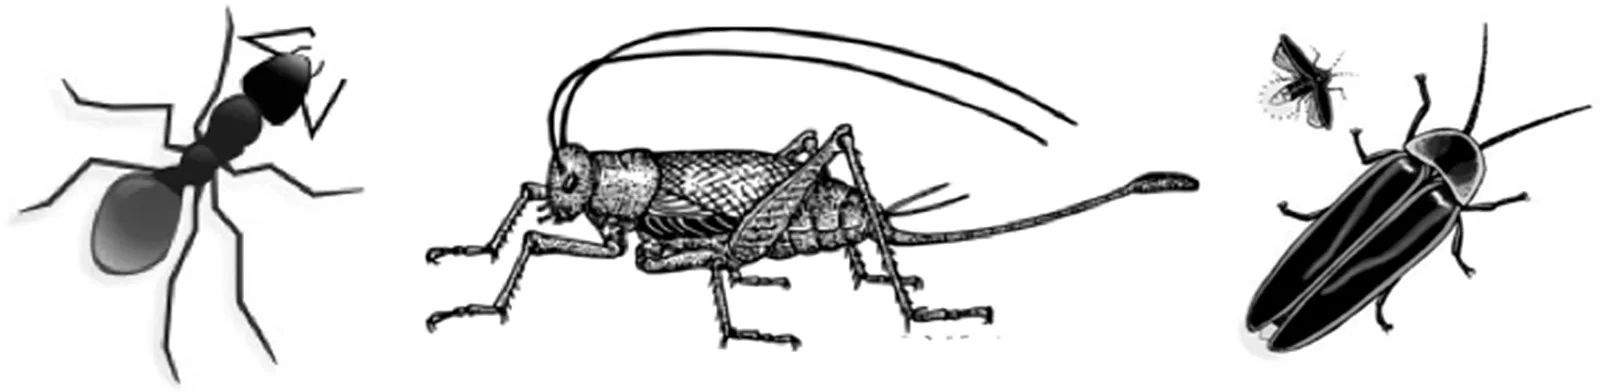 Illustration of an ant, a cricket, and 2 fireflies.